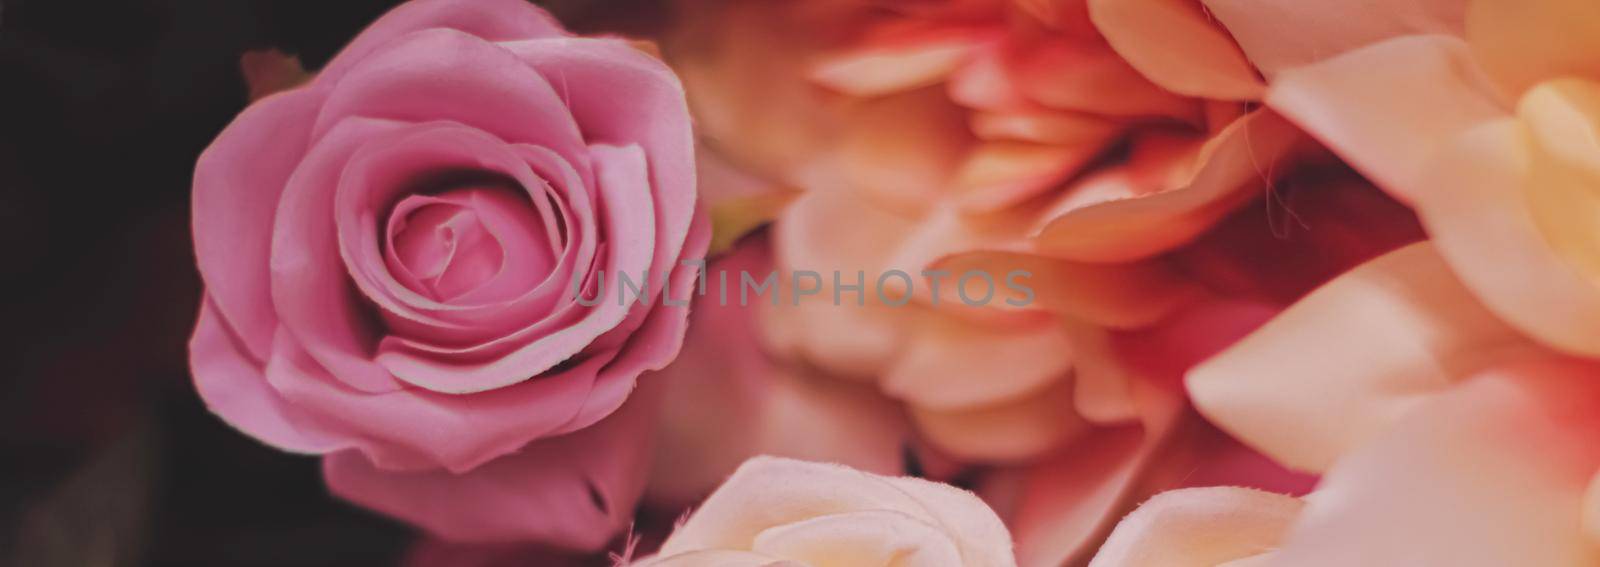 Roses as floral decoration for wedding and flower shop decor by Anneleven